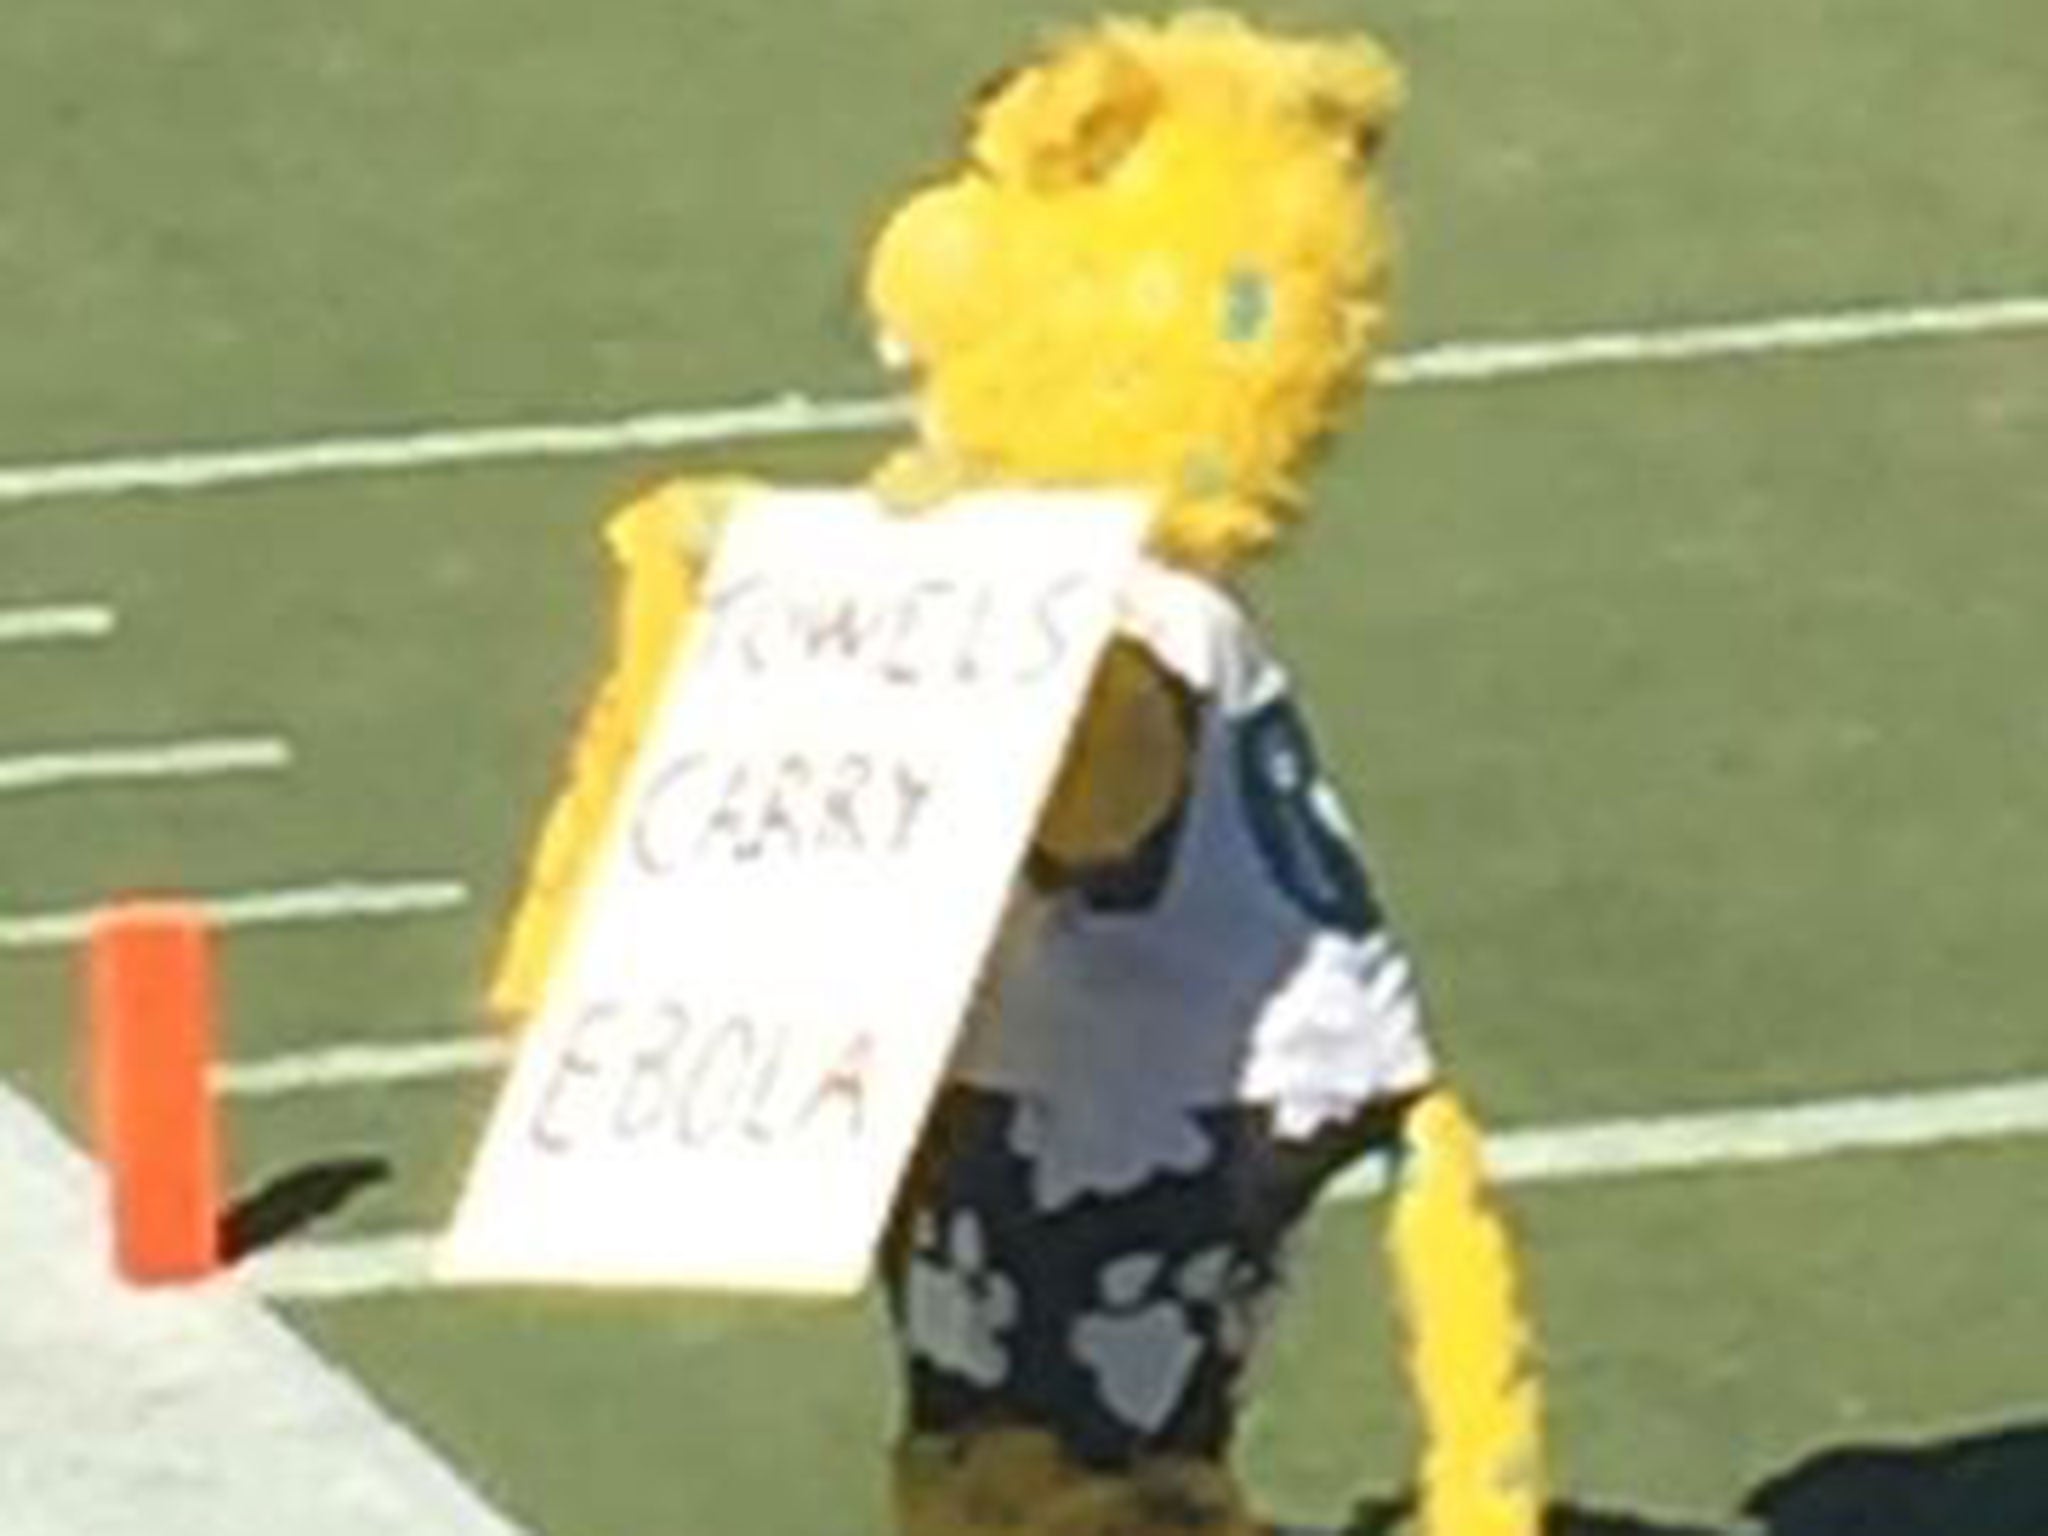 Jacksonville Jaguars mascot Jaxson de Ville holds up an inappropriate sign during the match against the Pittsburgh Steelers that reads 'Towels carry Ebola'